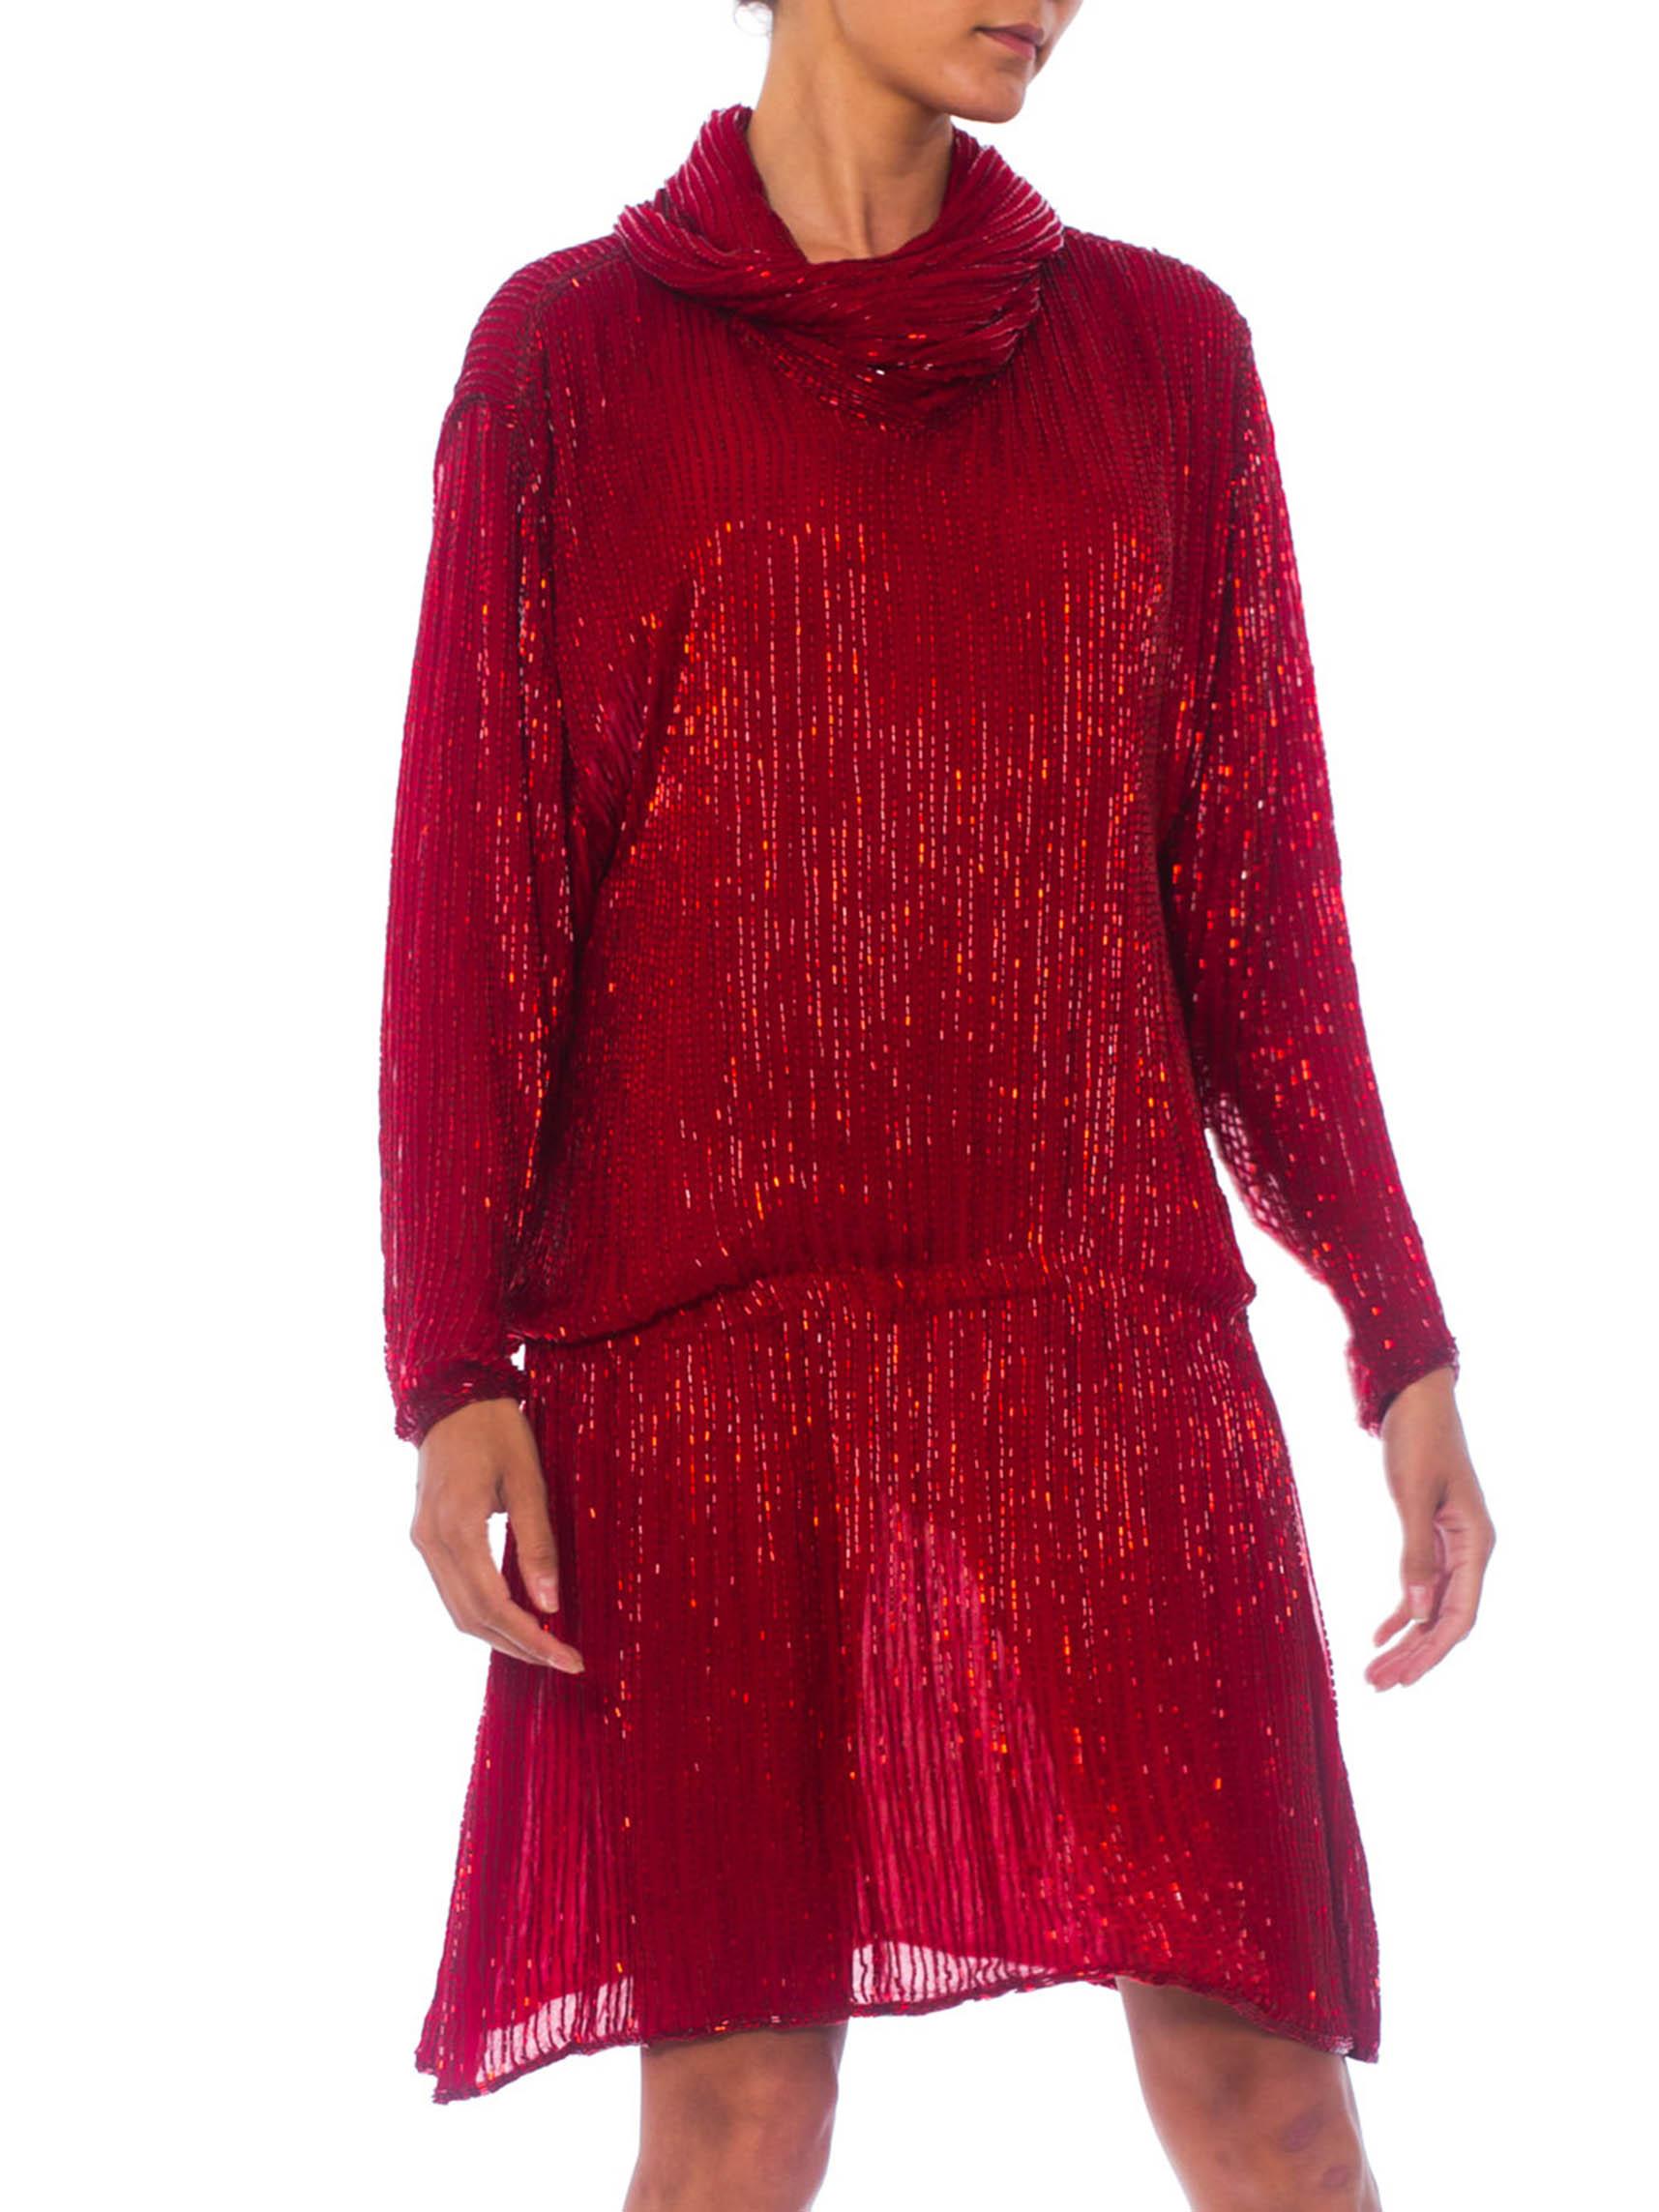 1970S HALSTON Red Silk Chiffon Oversized Mini Cocktail Dress Covered In Bugle B For Sale 3